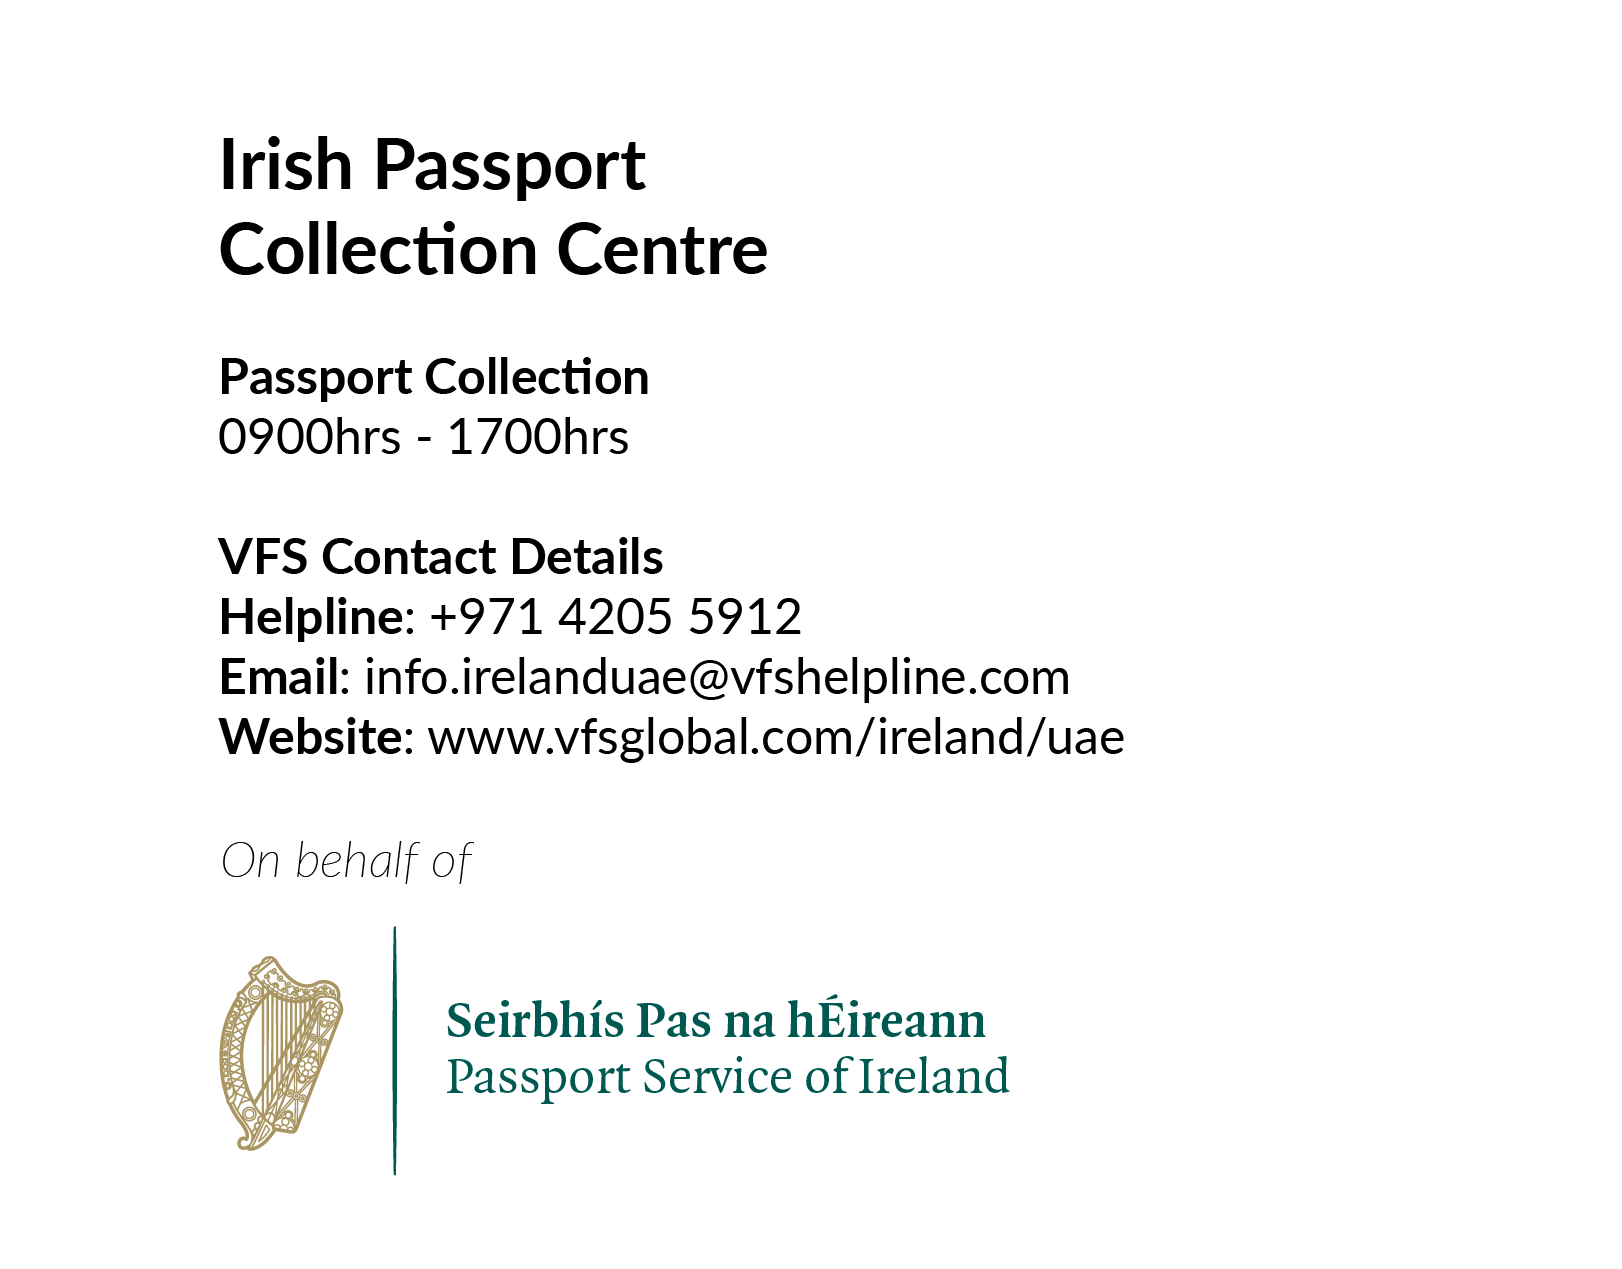 Opening of the Irish Passport Collection Centre in VFS Global, Dubai